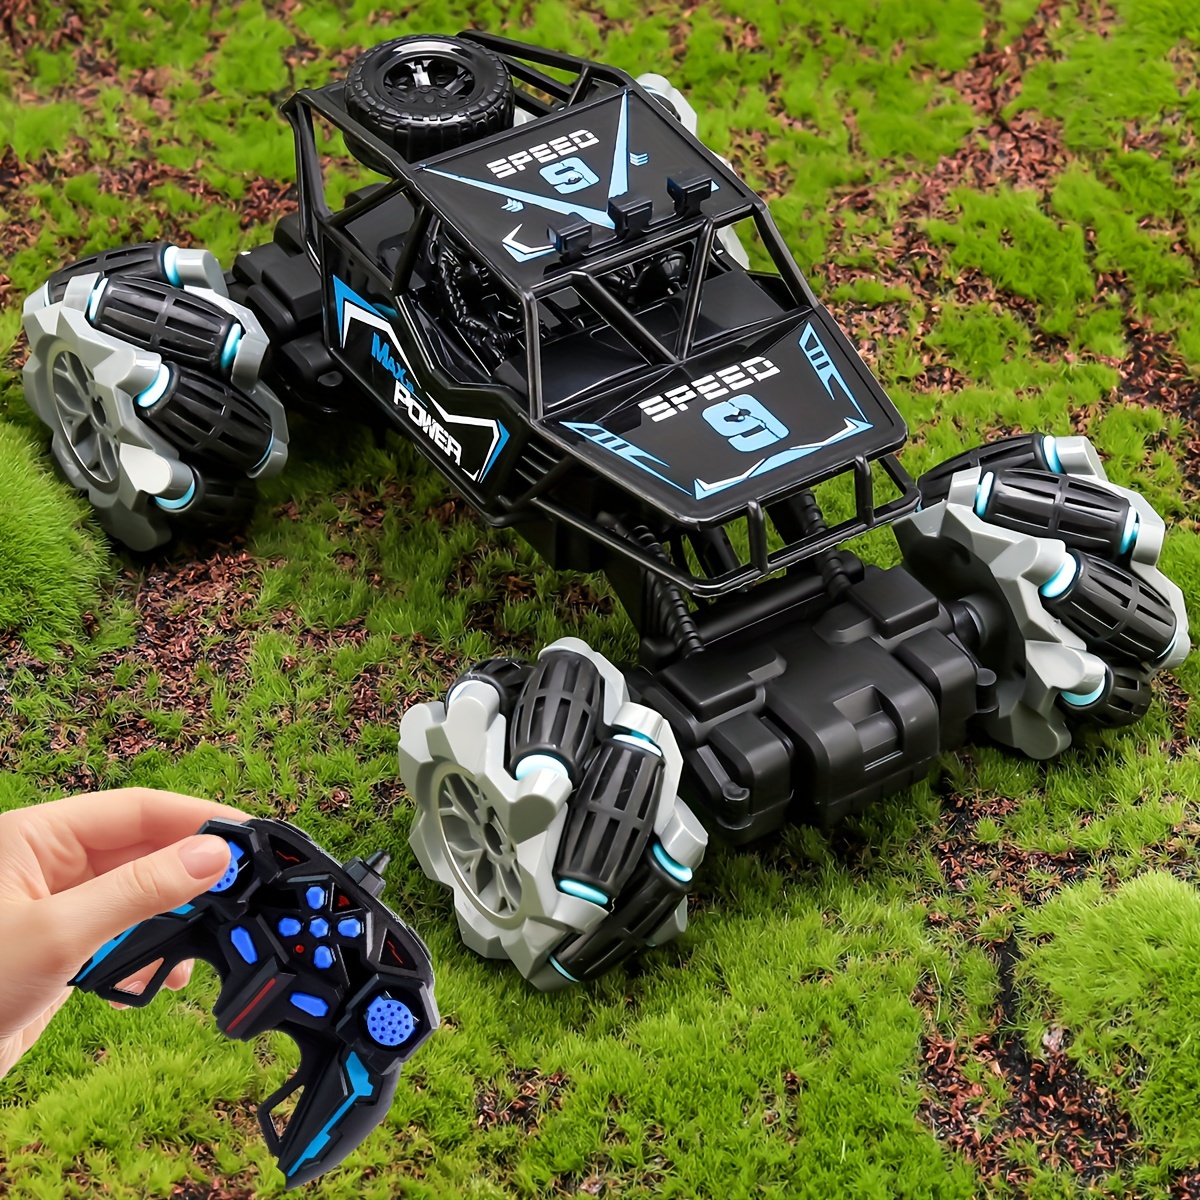 NKOK Blaze and The Monster Machines RC: High Performance Blaze -  Nickelodeon, Remote Control Offroad Monster Truck